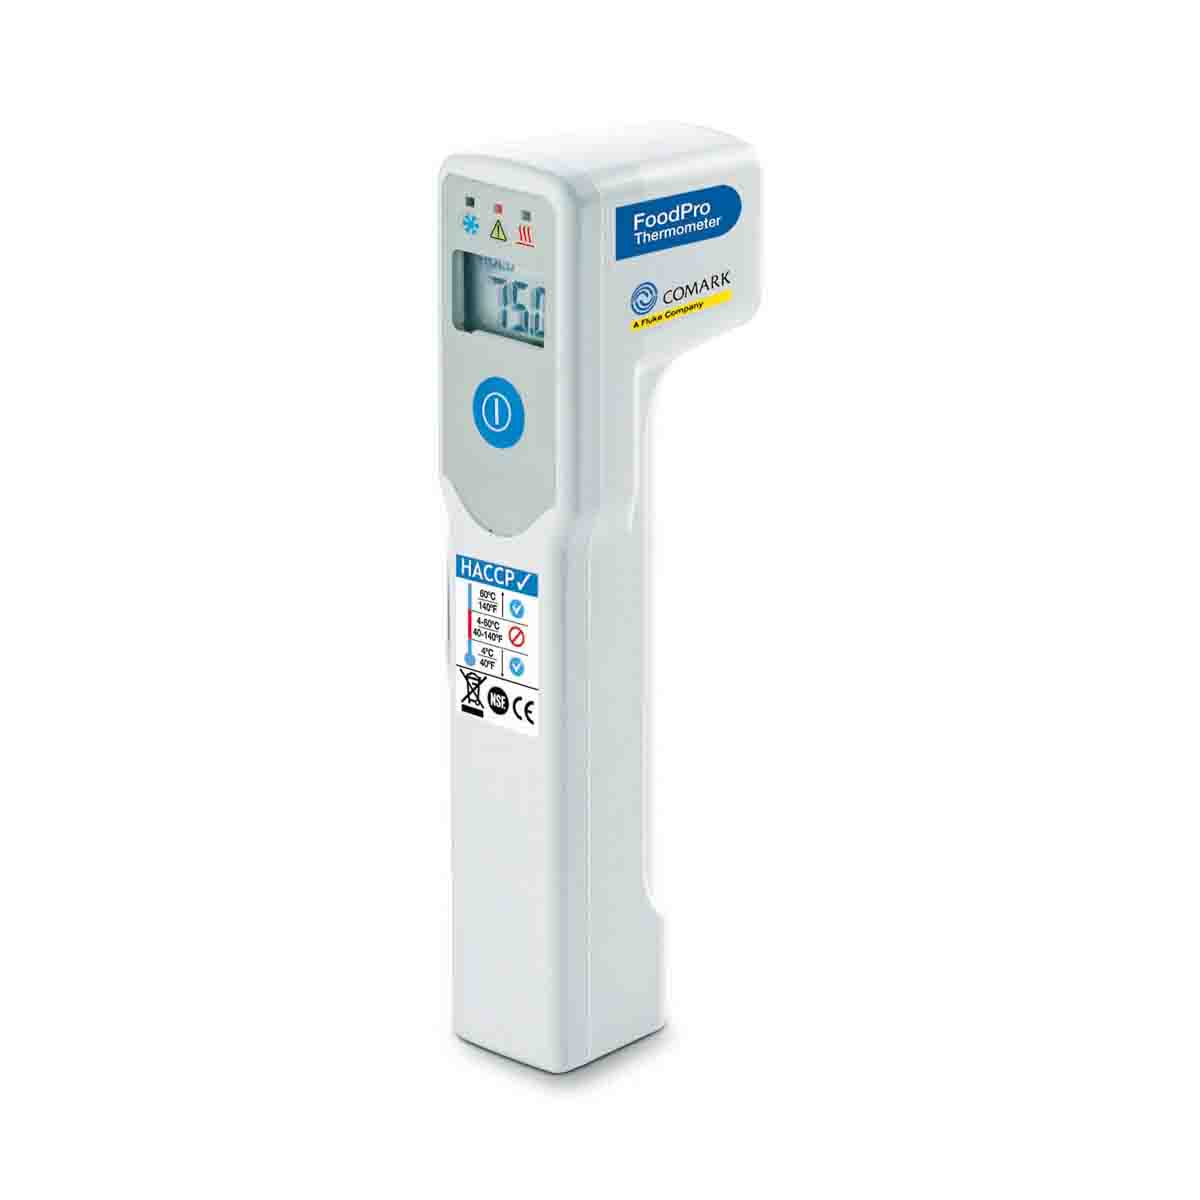 Comark FoodPro Infrared Thermometer, -30°C Min, +200°C Max, °C and °F Measurements